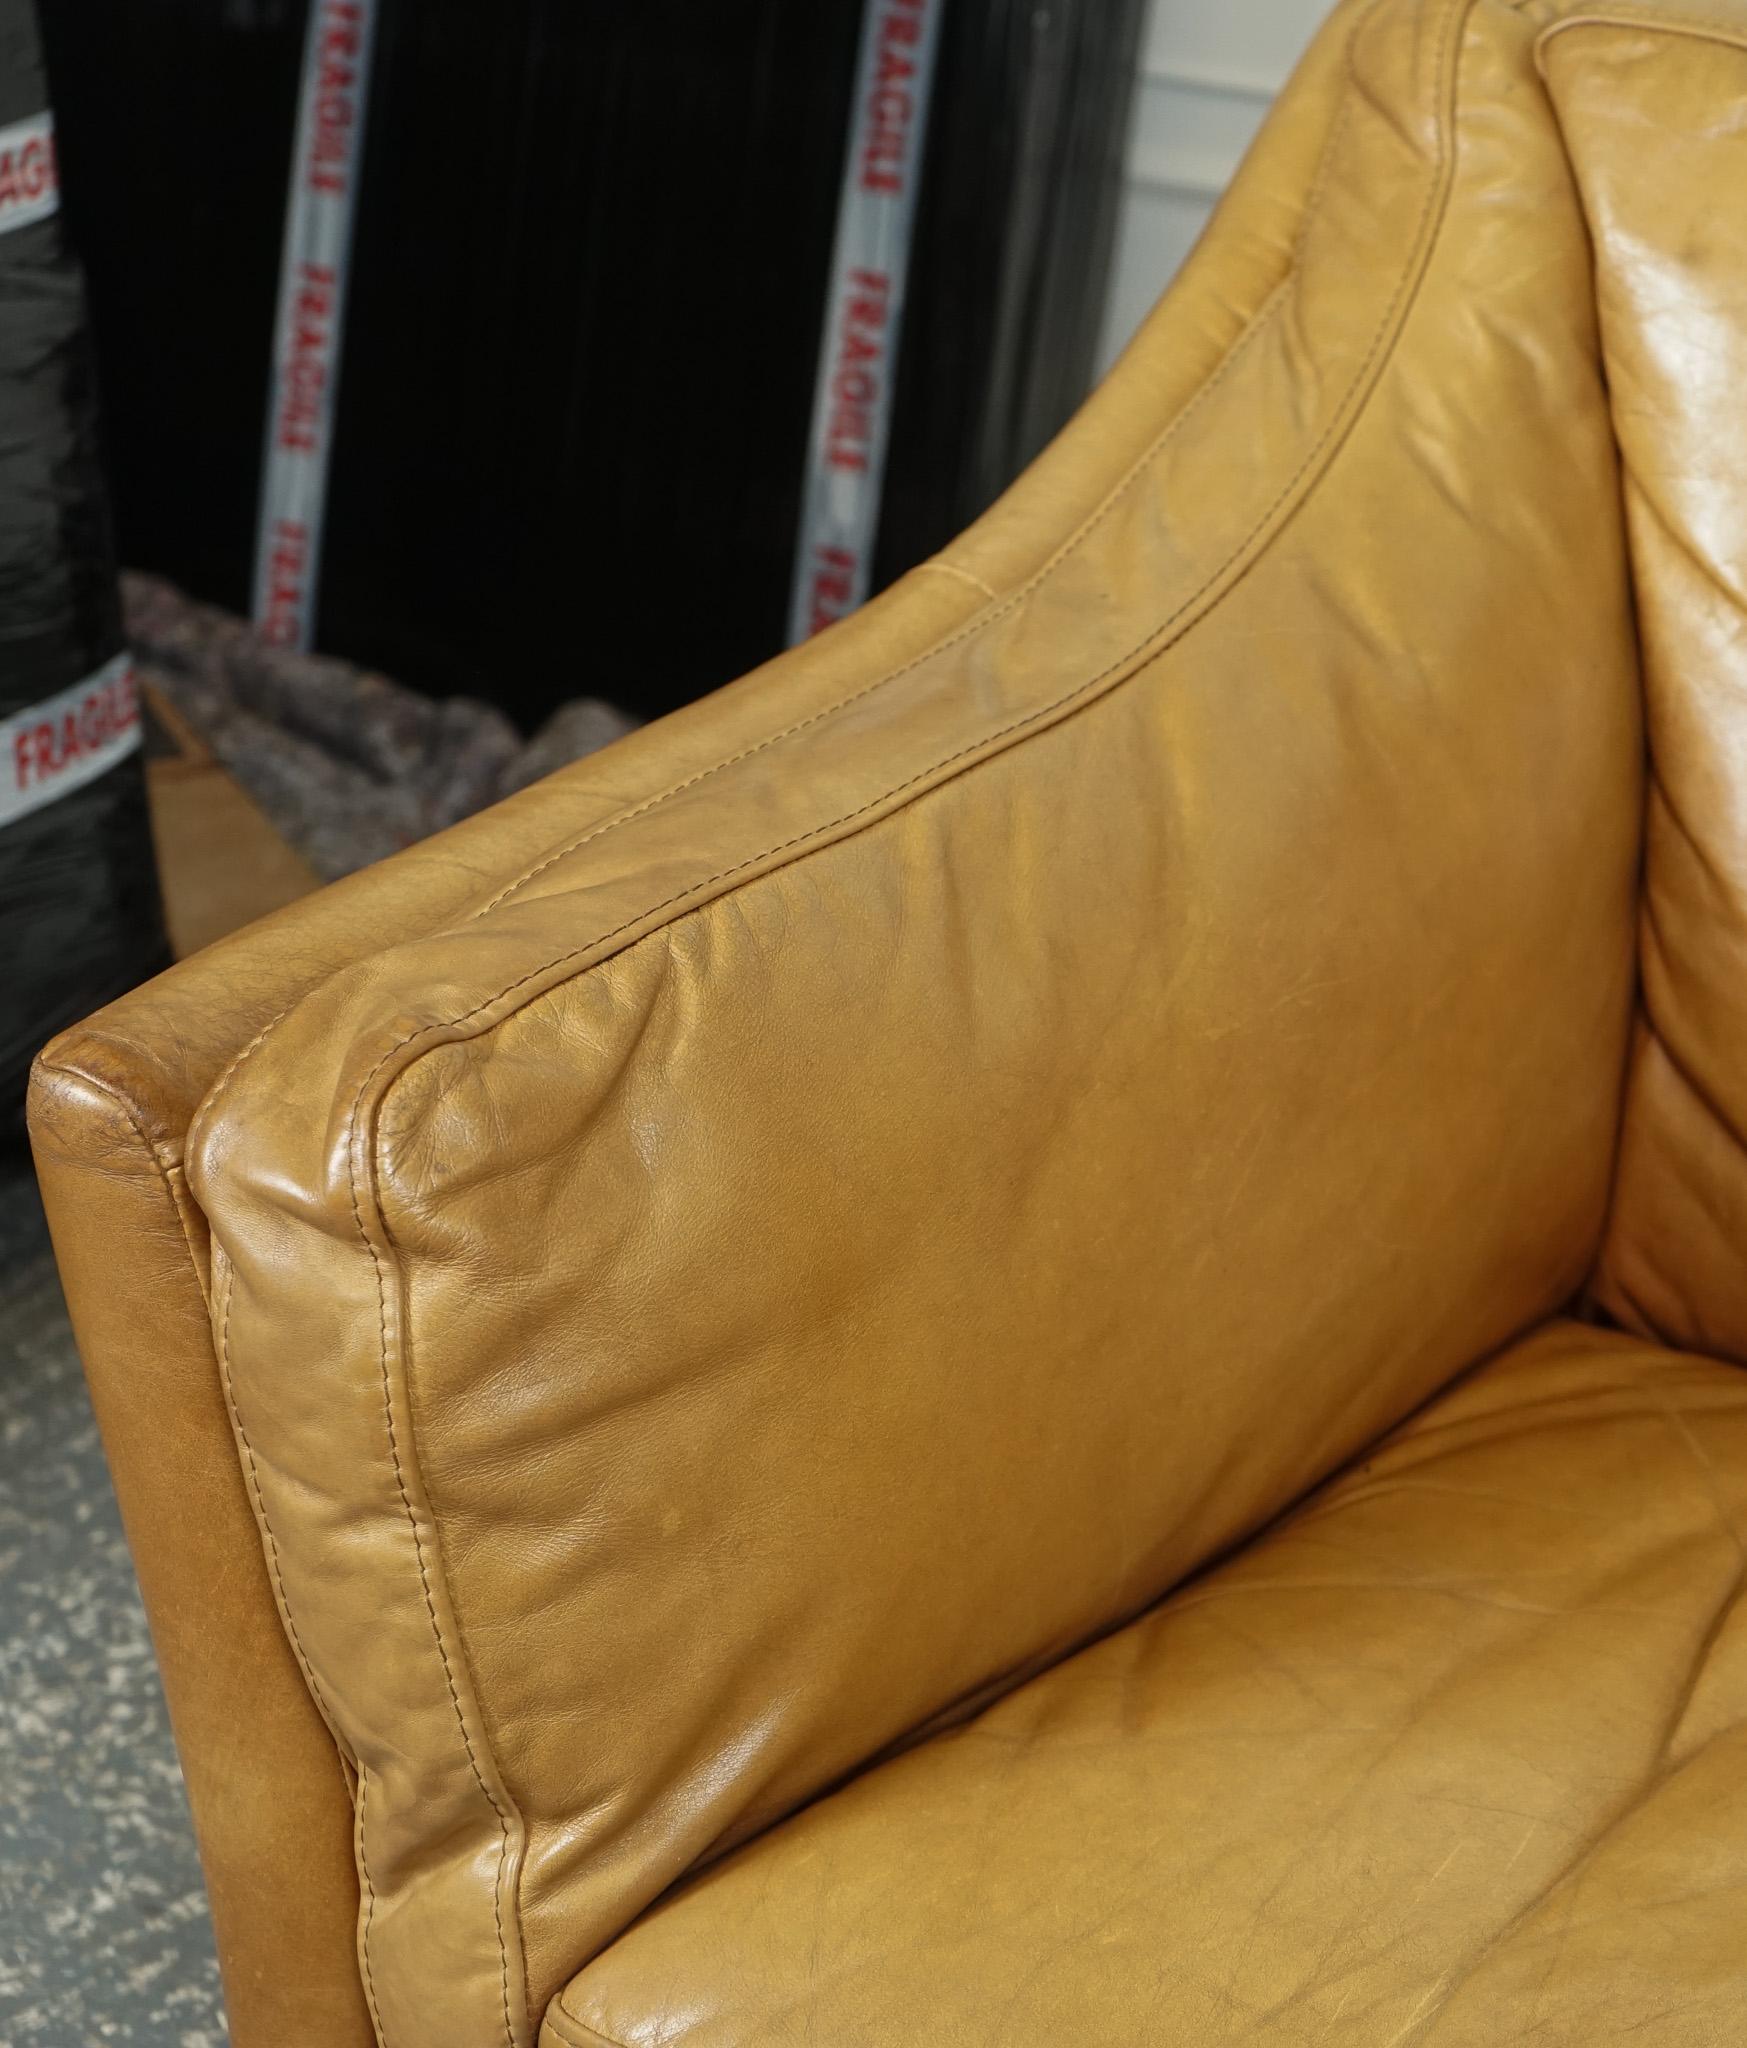 COMPACT AND VERY COMFORTABLE HALO REGGIO Tan LEATHER ARMCHAiR im Zustand „Gut“ im Angebot in Pulborough, GB